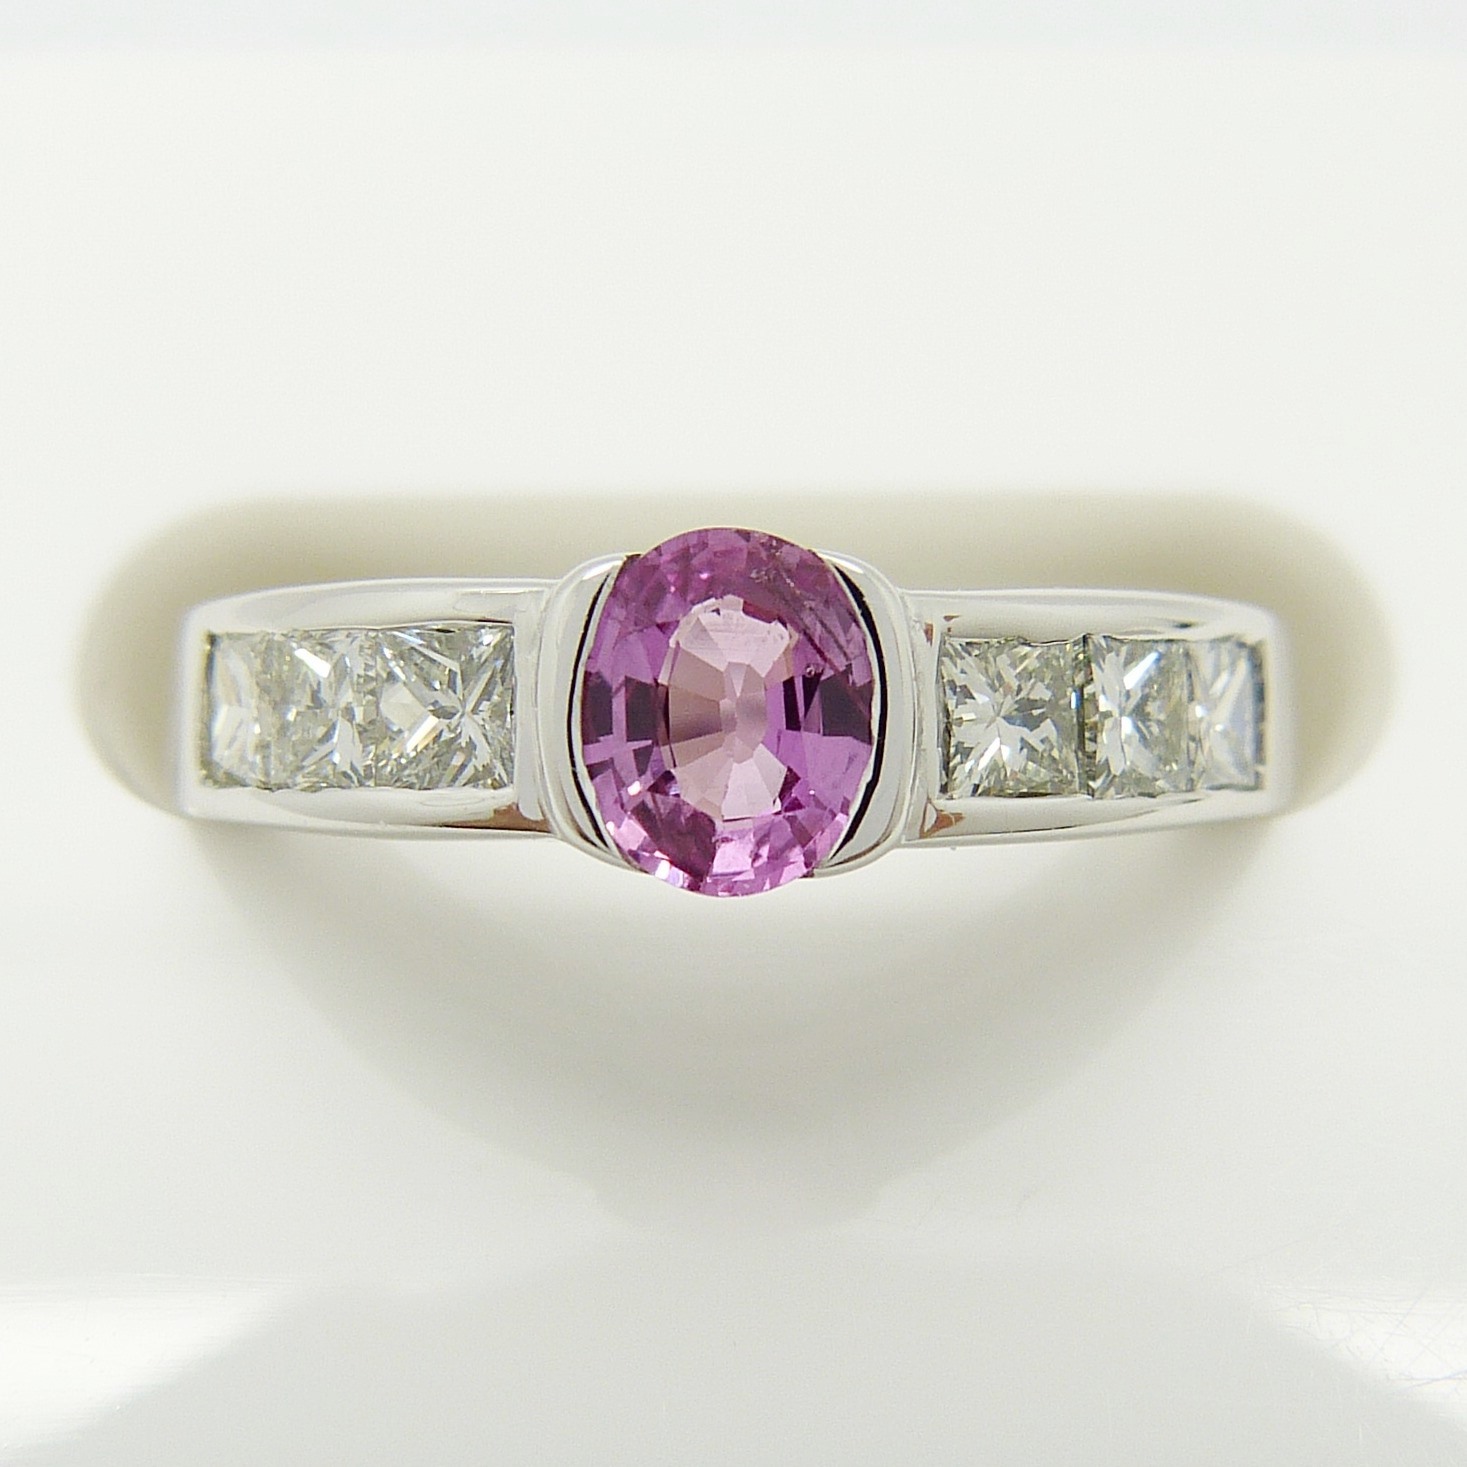 A pink Sapphire gemstone and princess-cut Diamond ring in 18ct white Gold